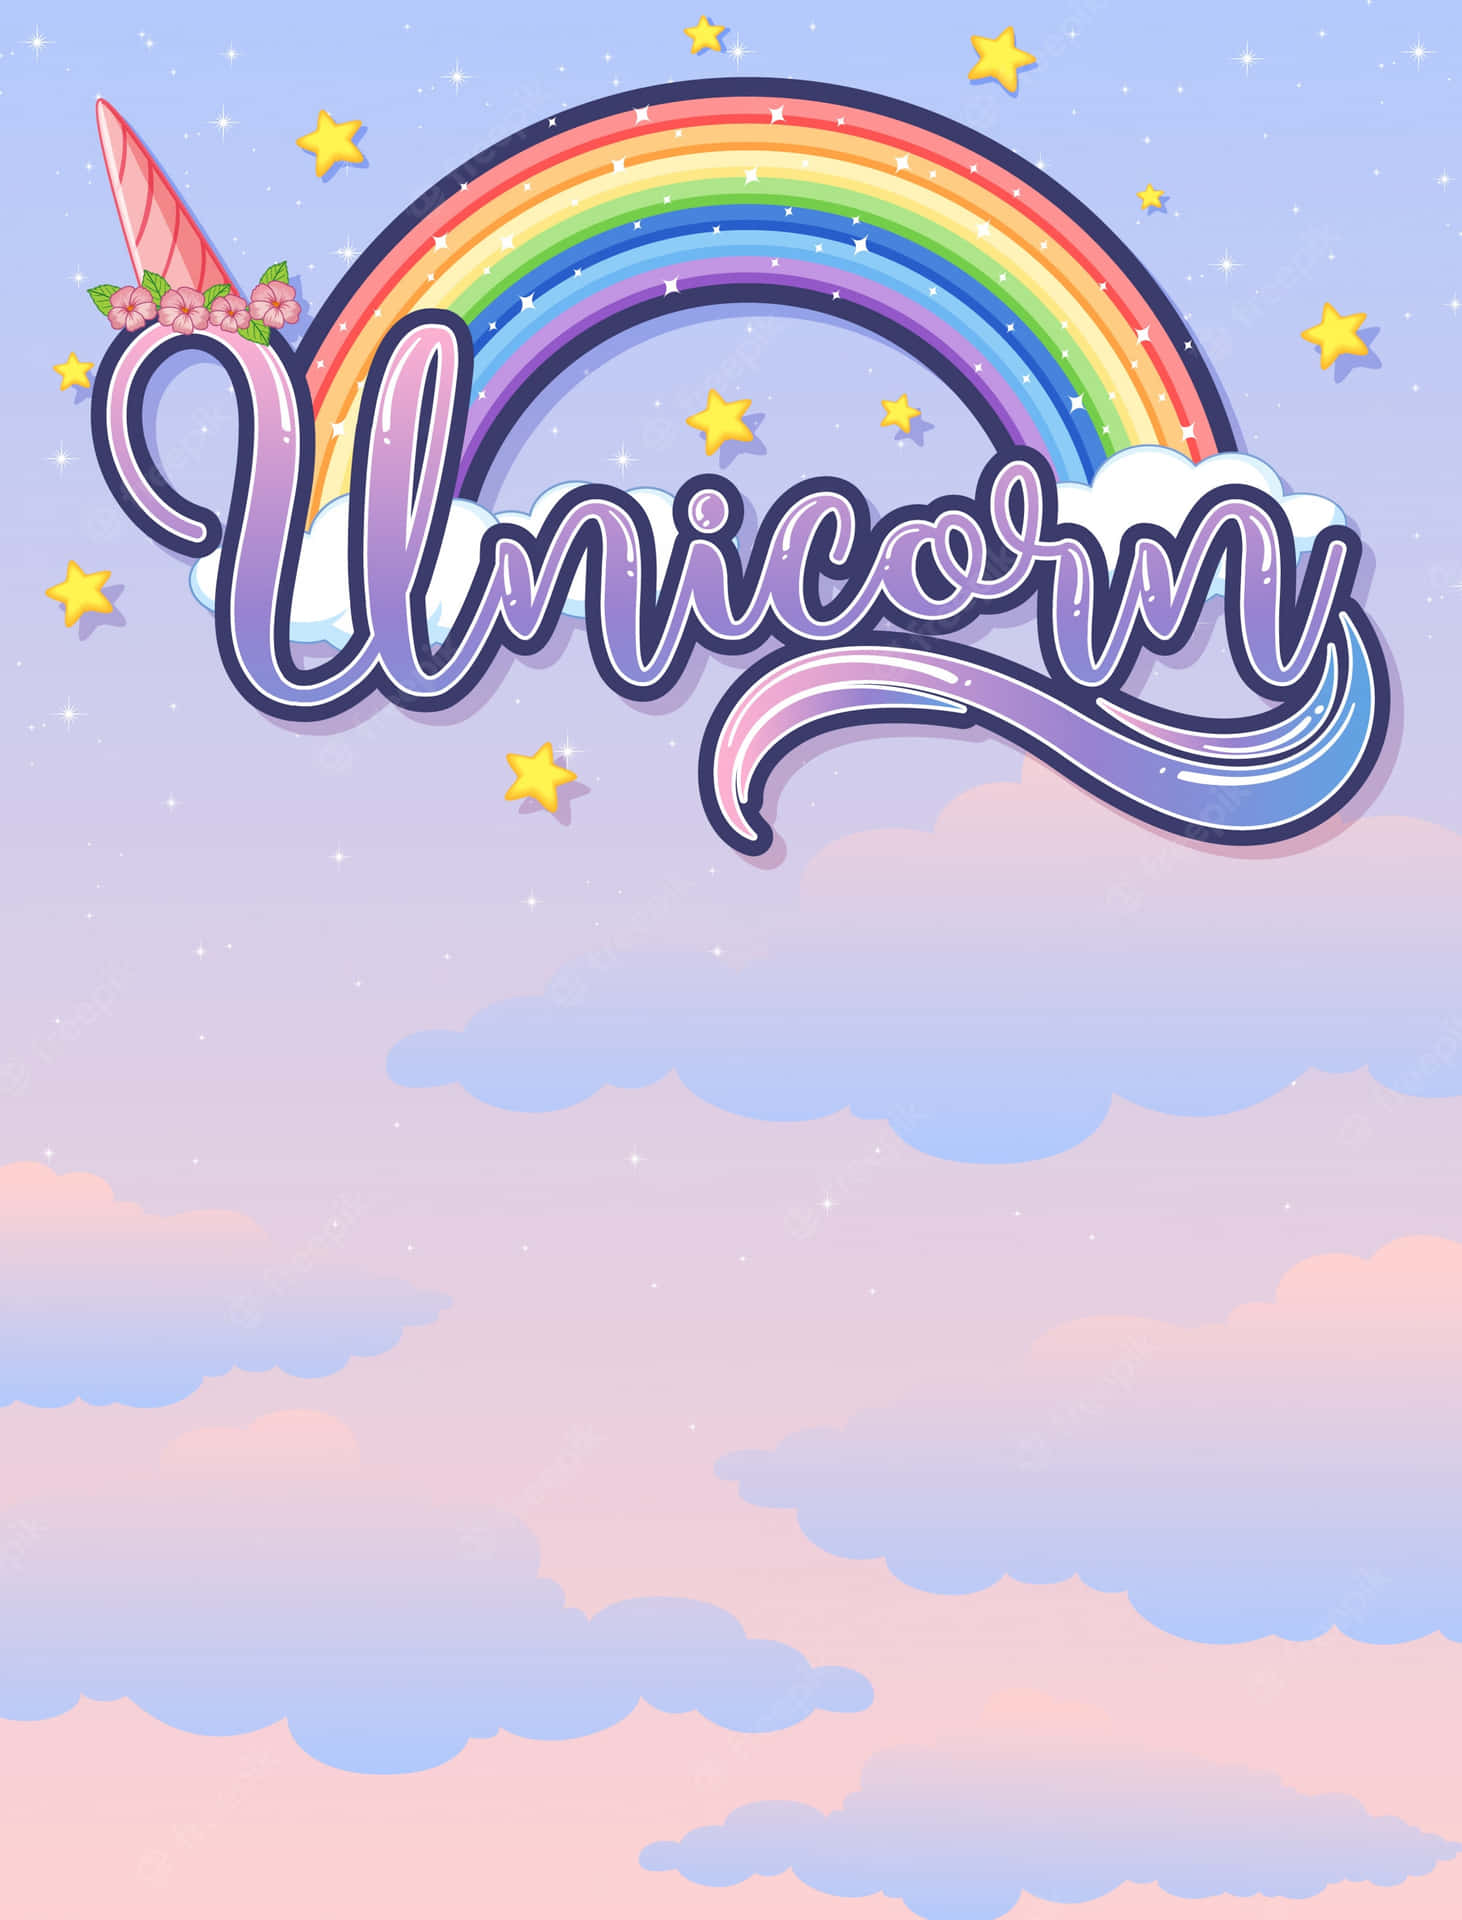 “A mystical pastel unicorn with its beautiful horns, flowing mane and tail.” Wallpaper